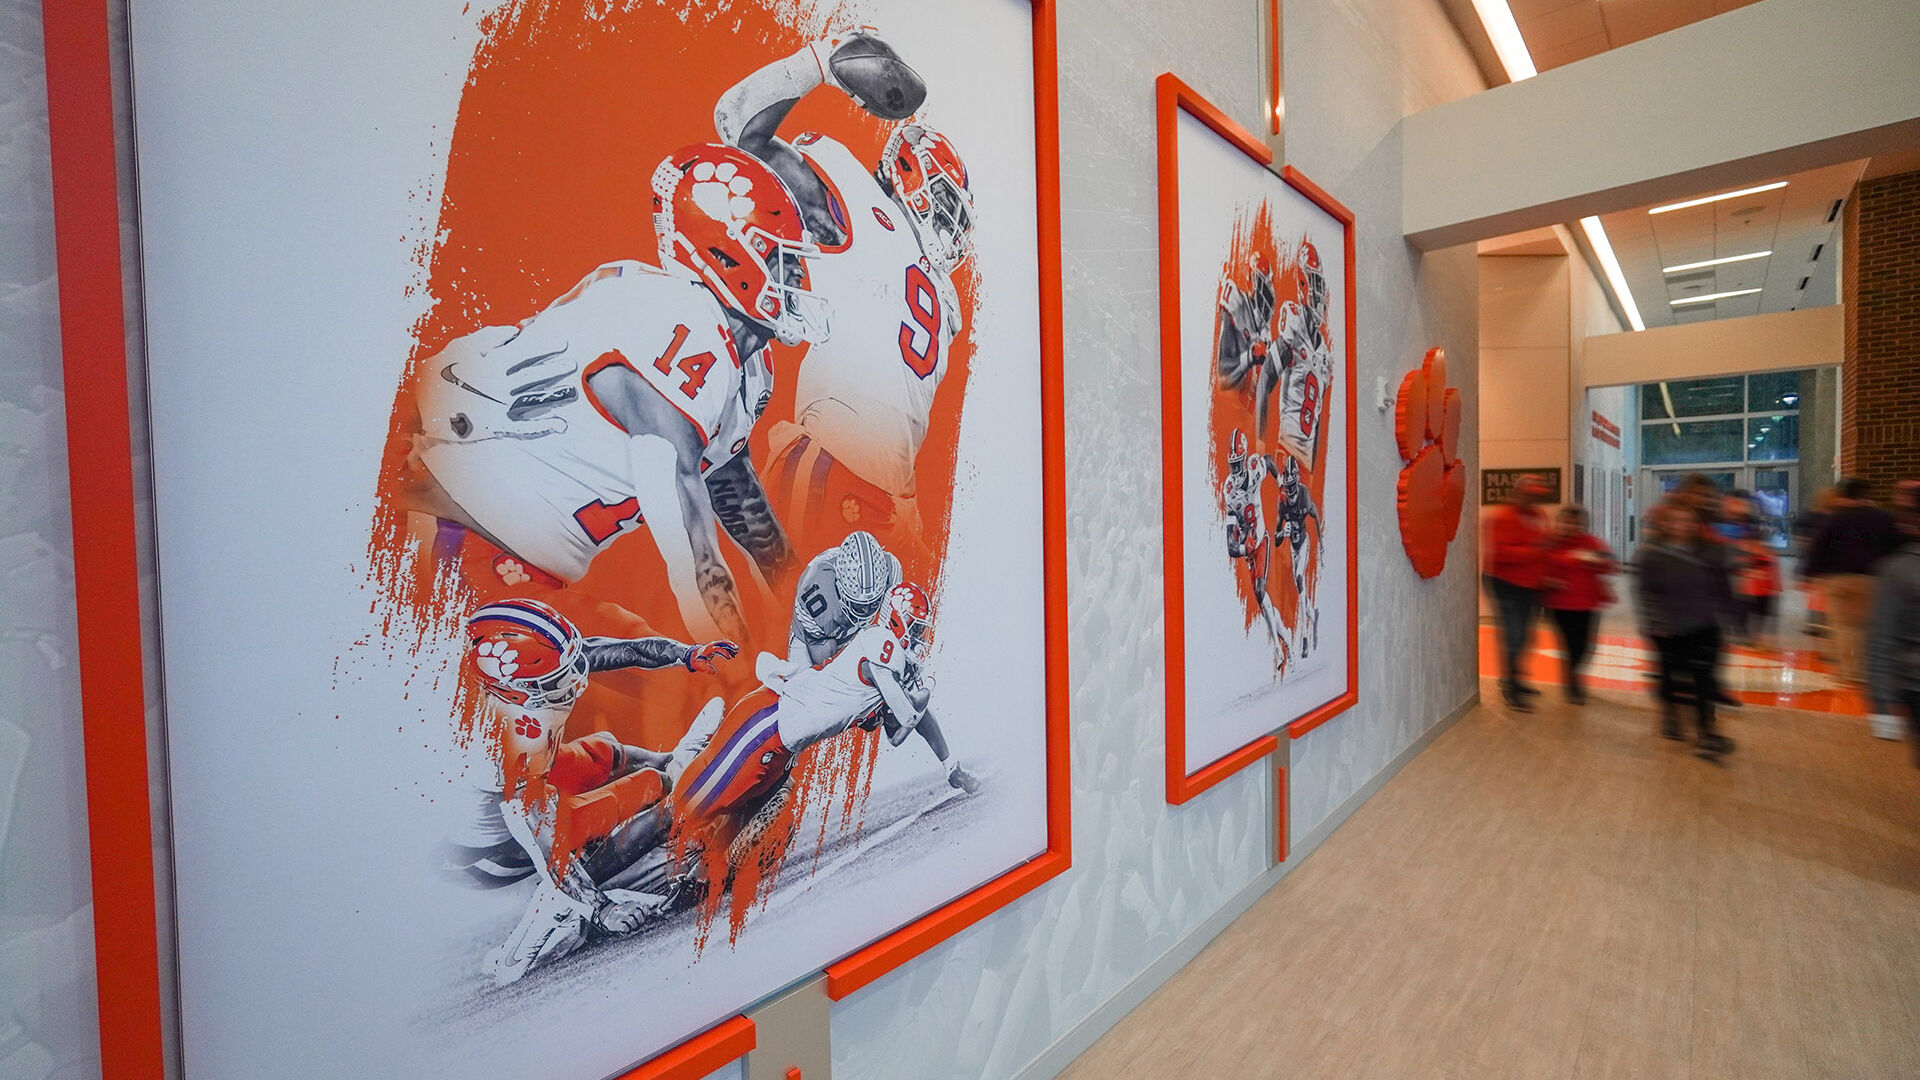 Framed Wall Graphics of Clemson Football Players at Clemson's Masters Club